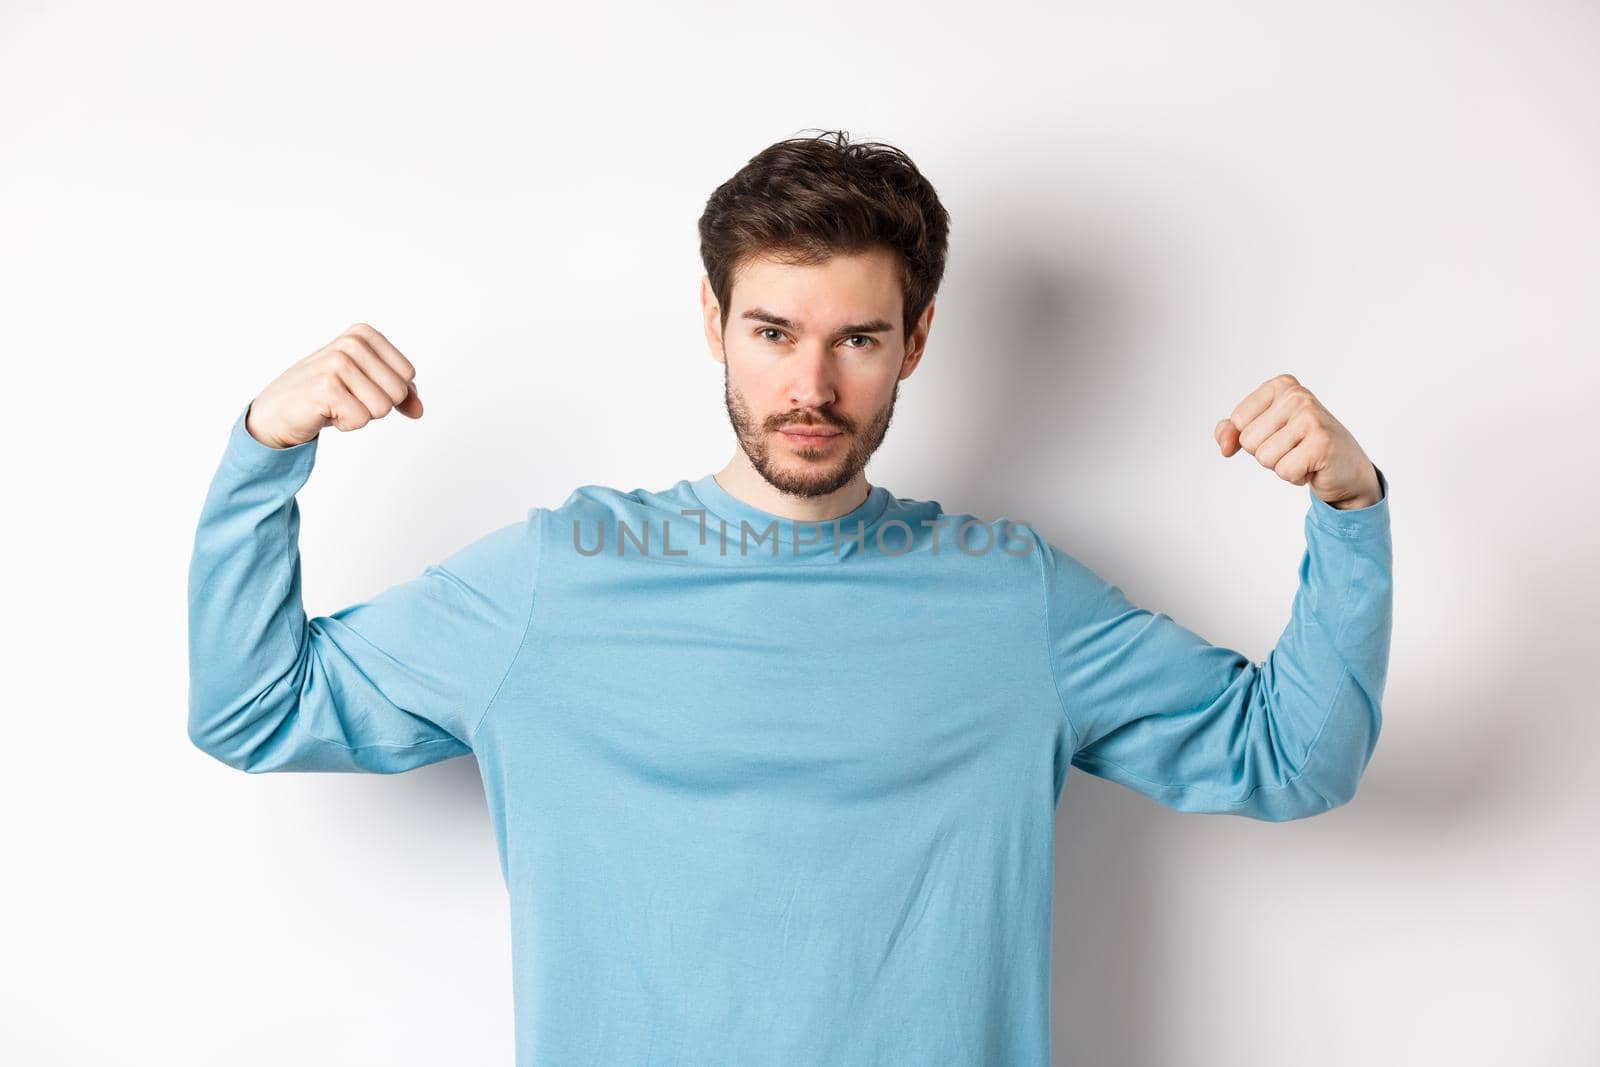 Confident and strong macho man flexing biceps, showing strength in muscles after gym workout, standing over white background.